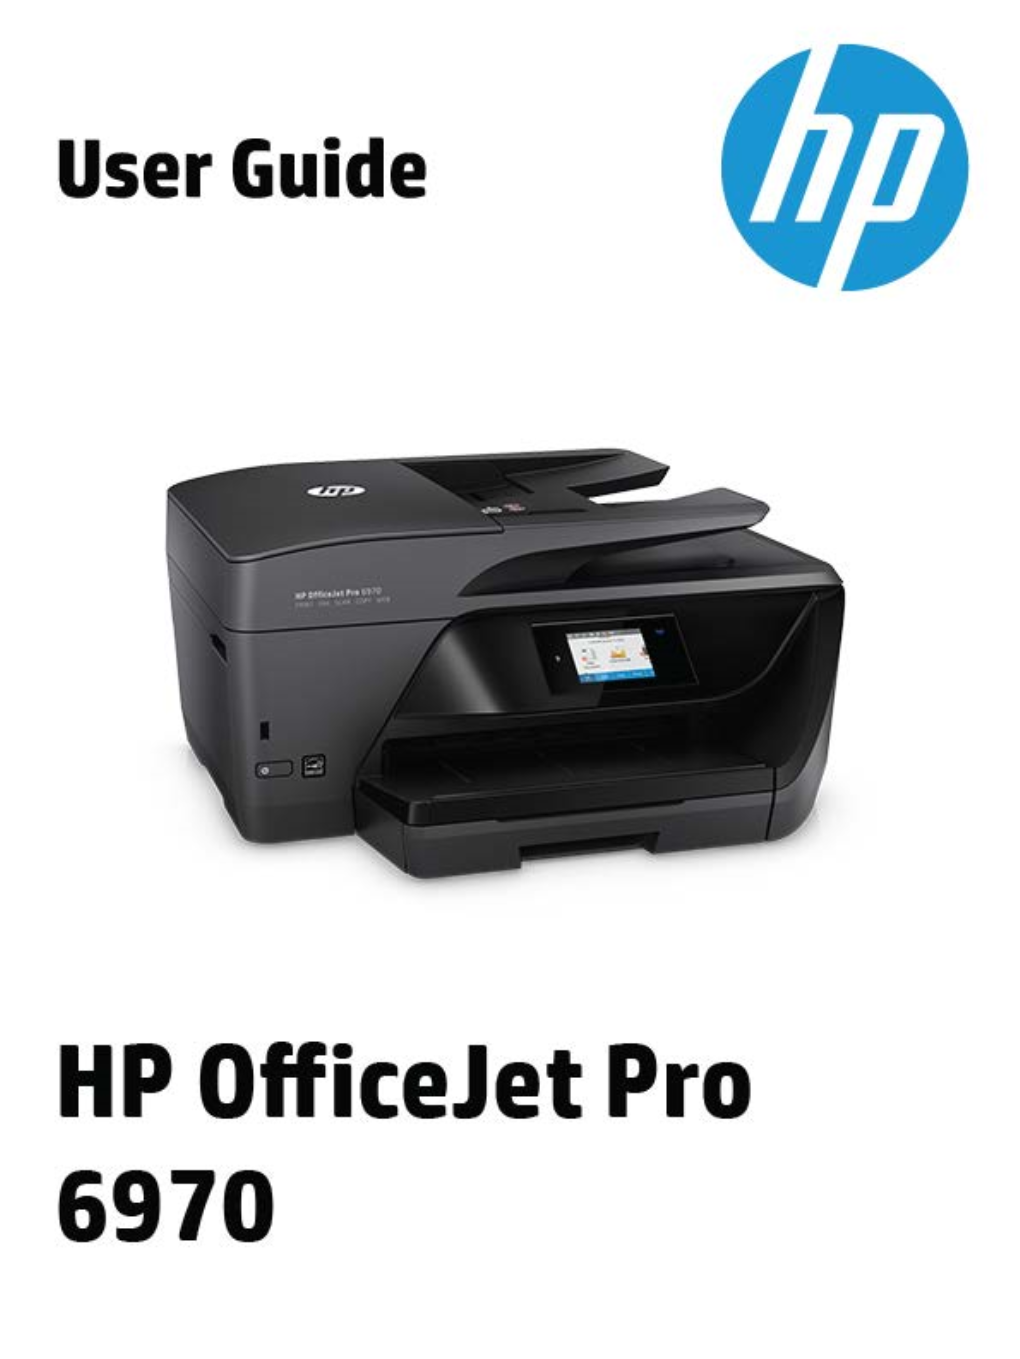 HP Officejet Pro 6970 All-In-One Series User Guide